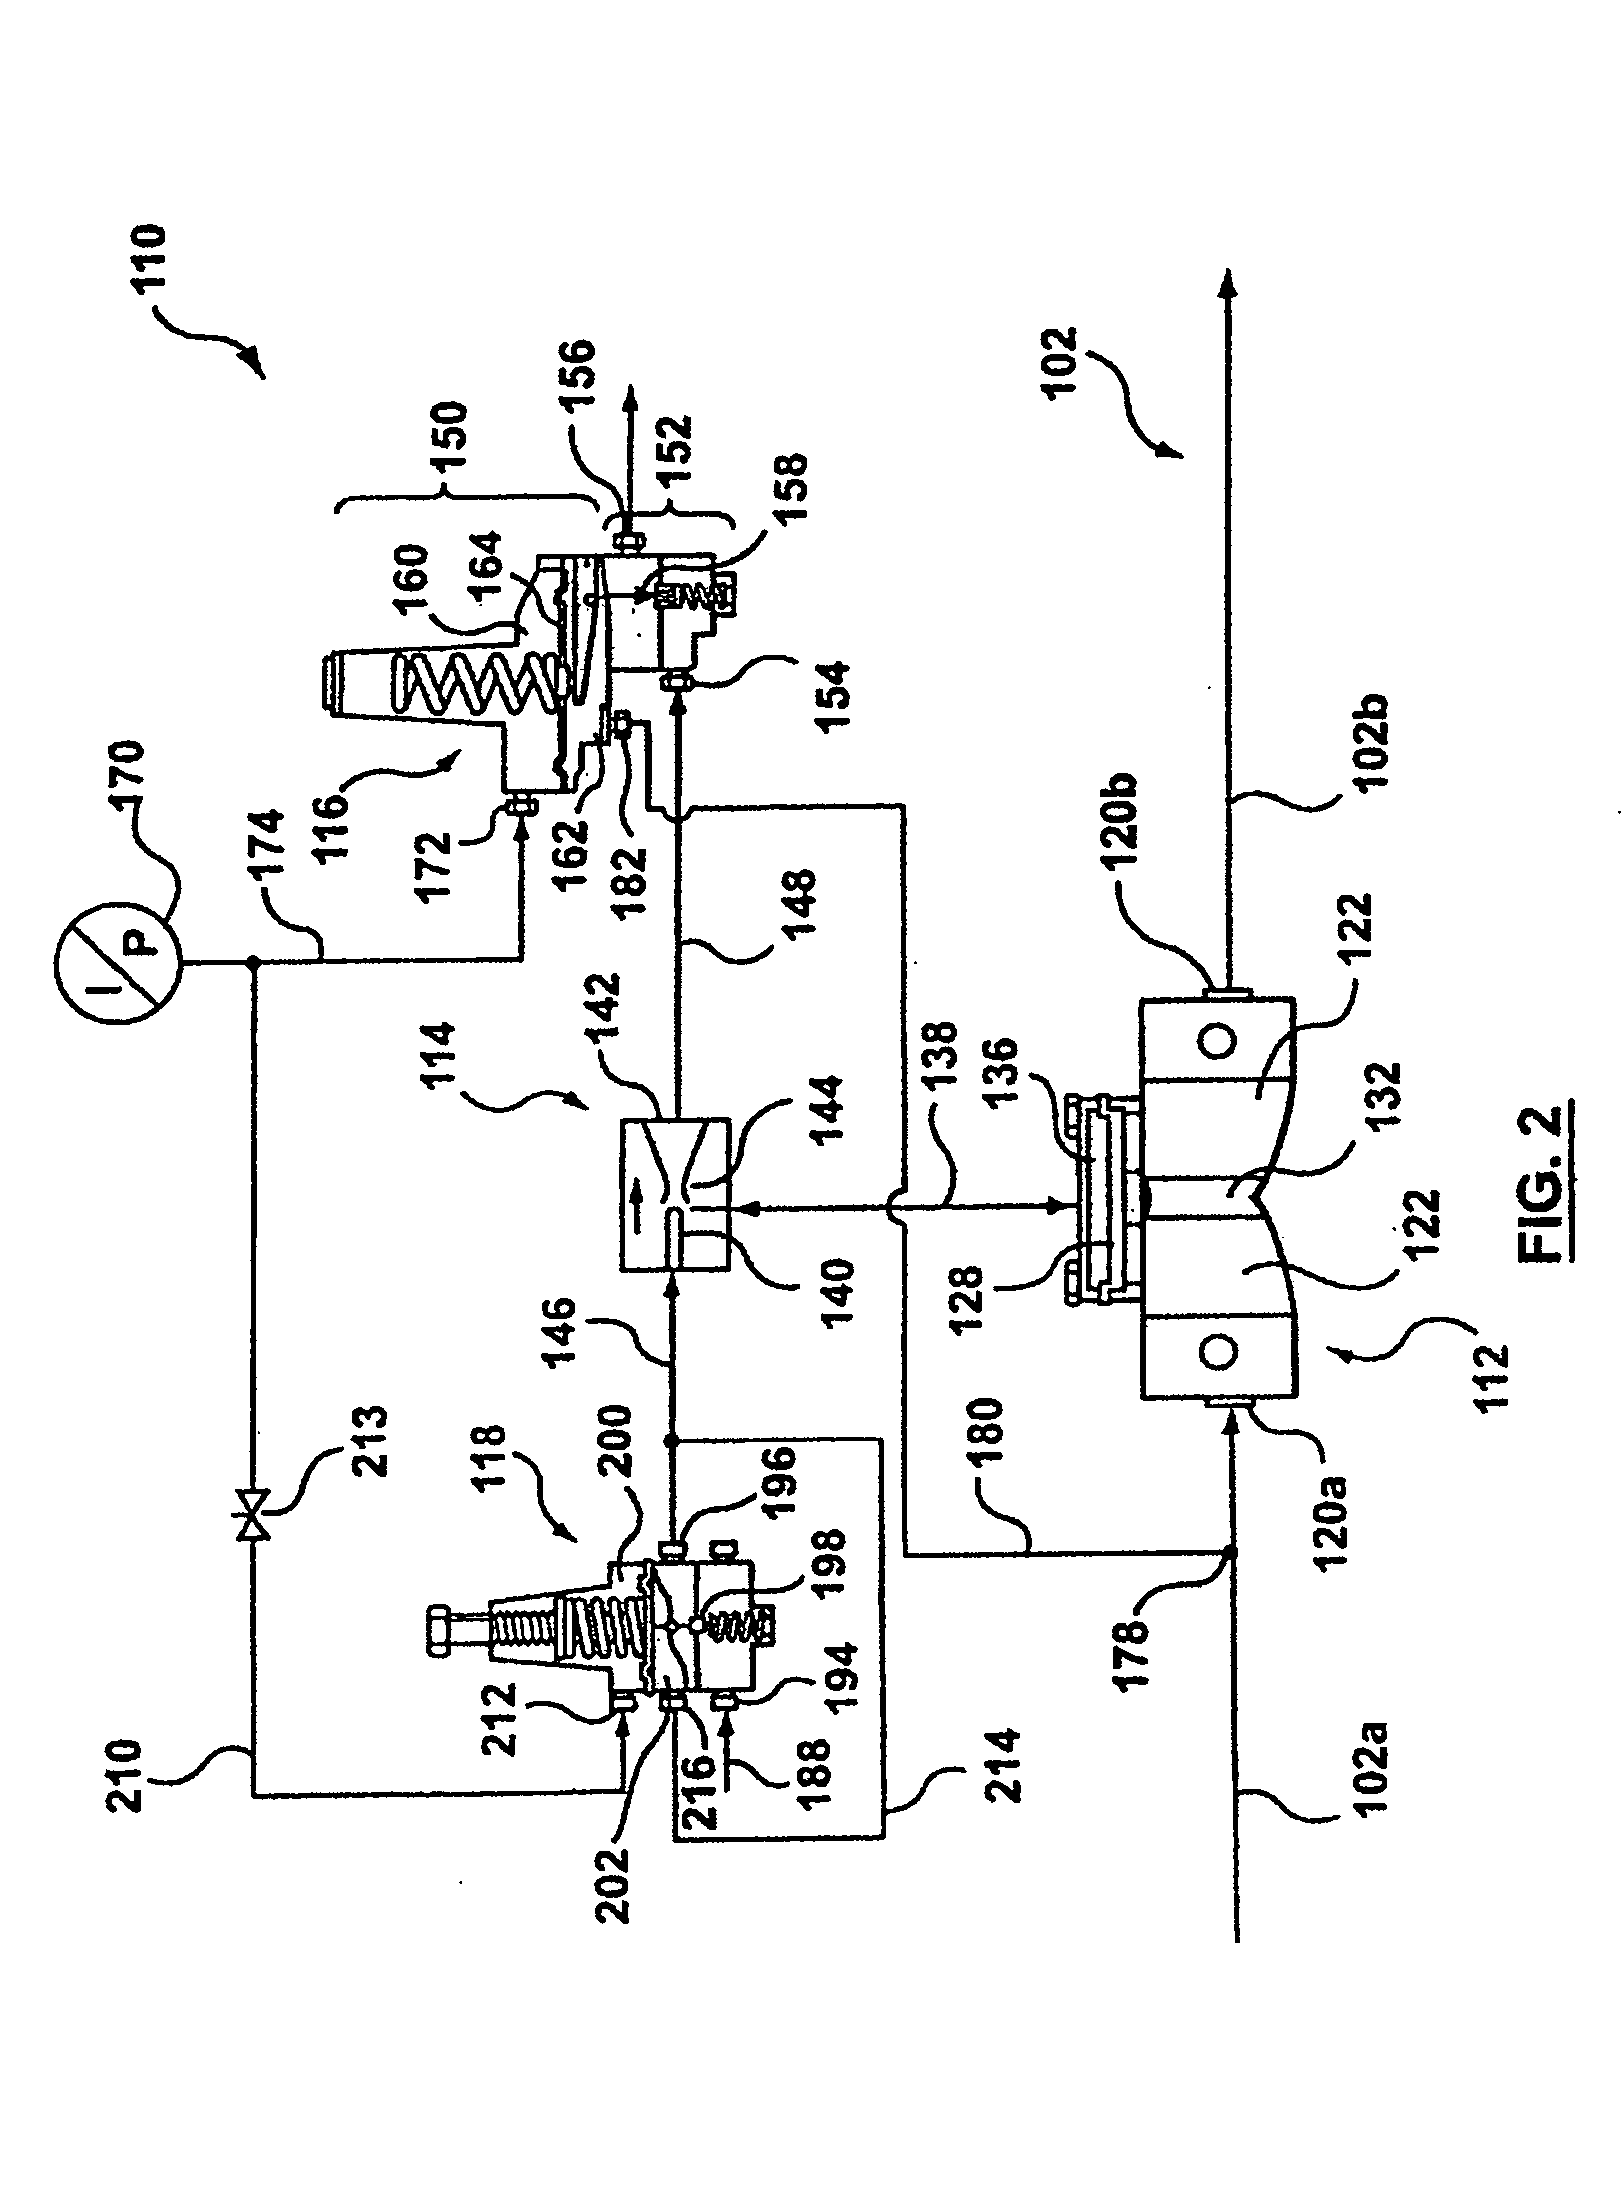 Pressure control system for low pressure high flow operation